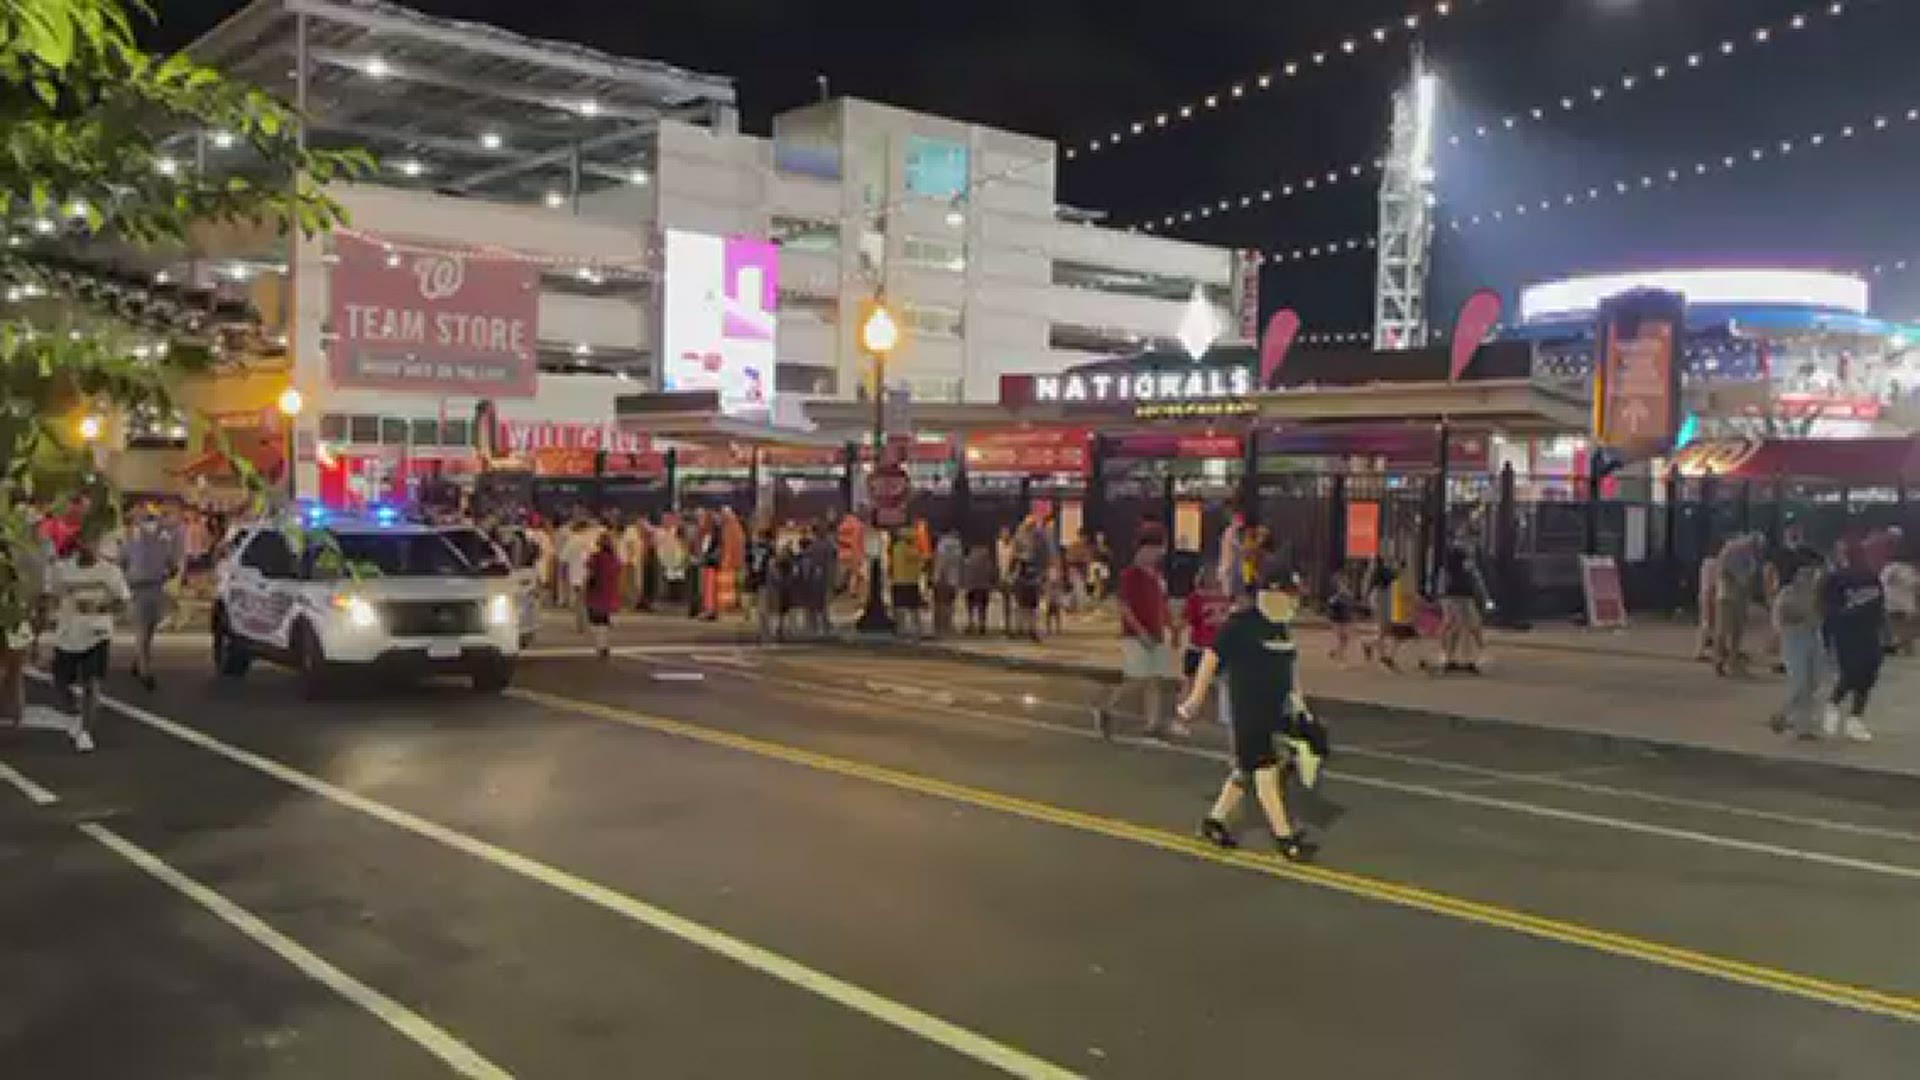 Four people were shot Saturday outside Nationals Park located in the Navy Yard area of Washington D.C., according to the Washington Nationals